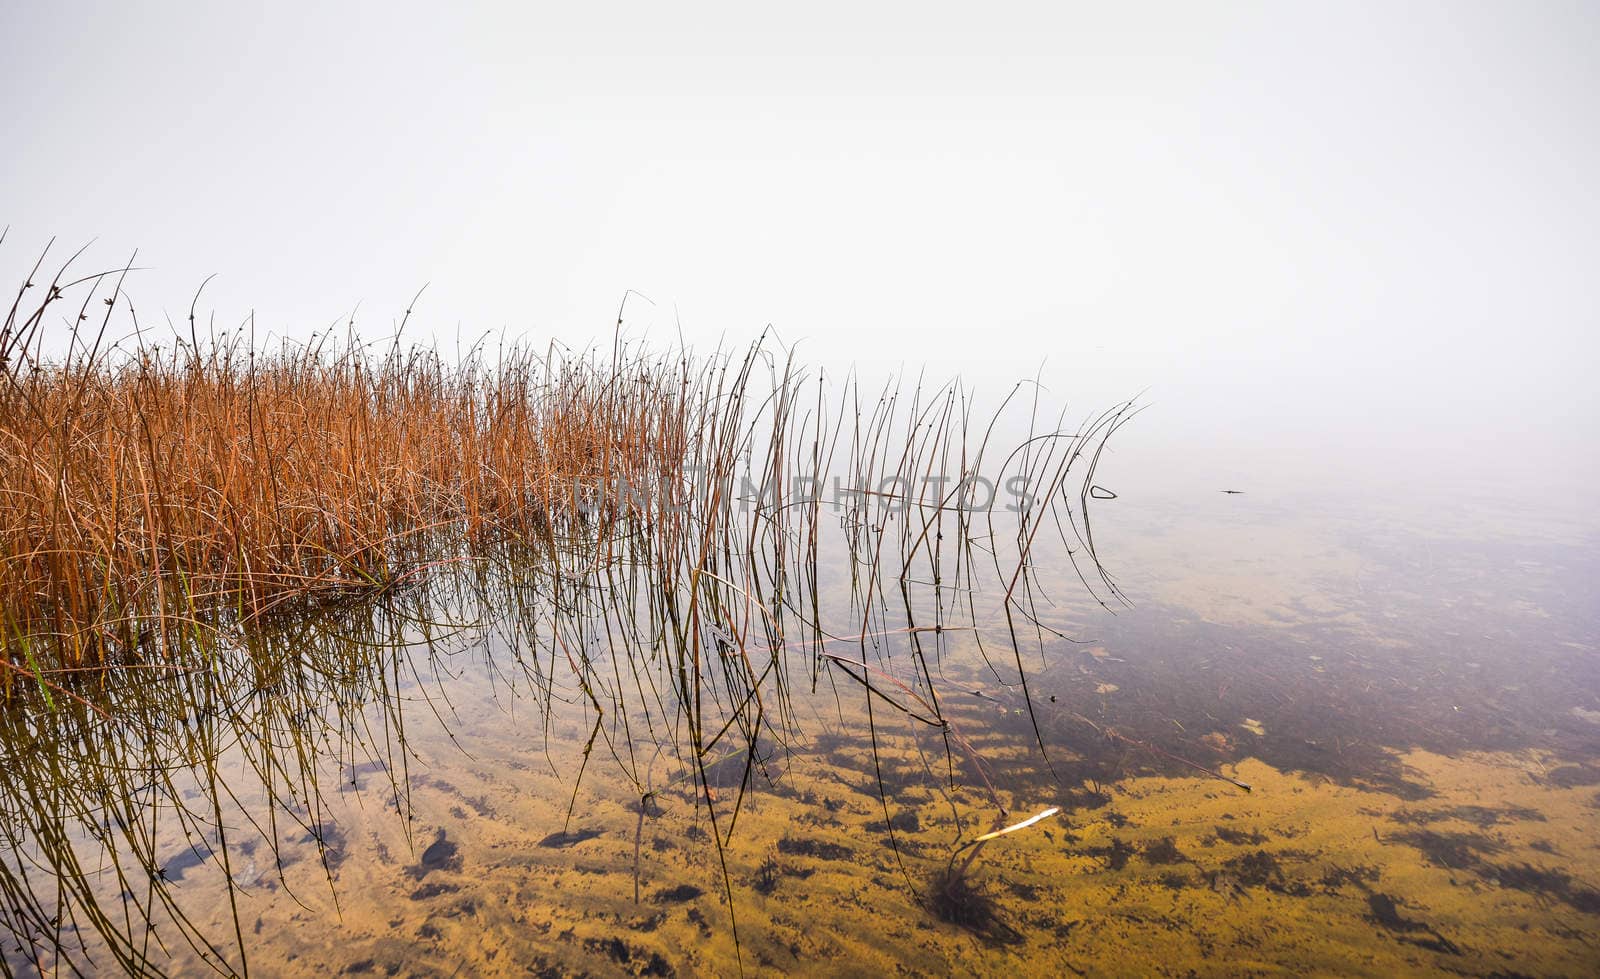 Watery grass to nowhere - thick fog on the Ottawa River. by valleyboi63